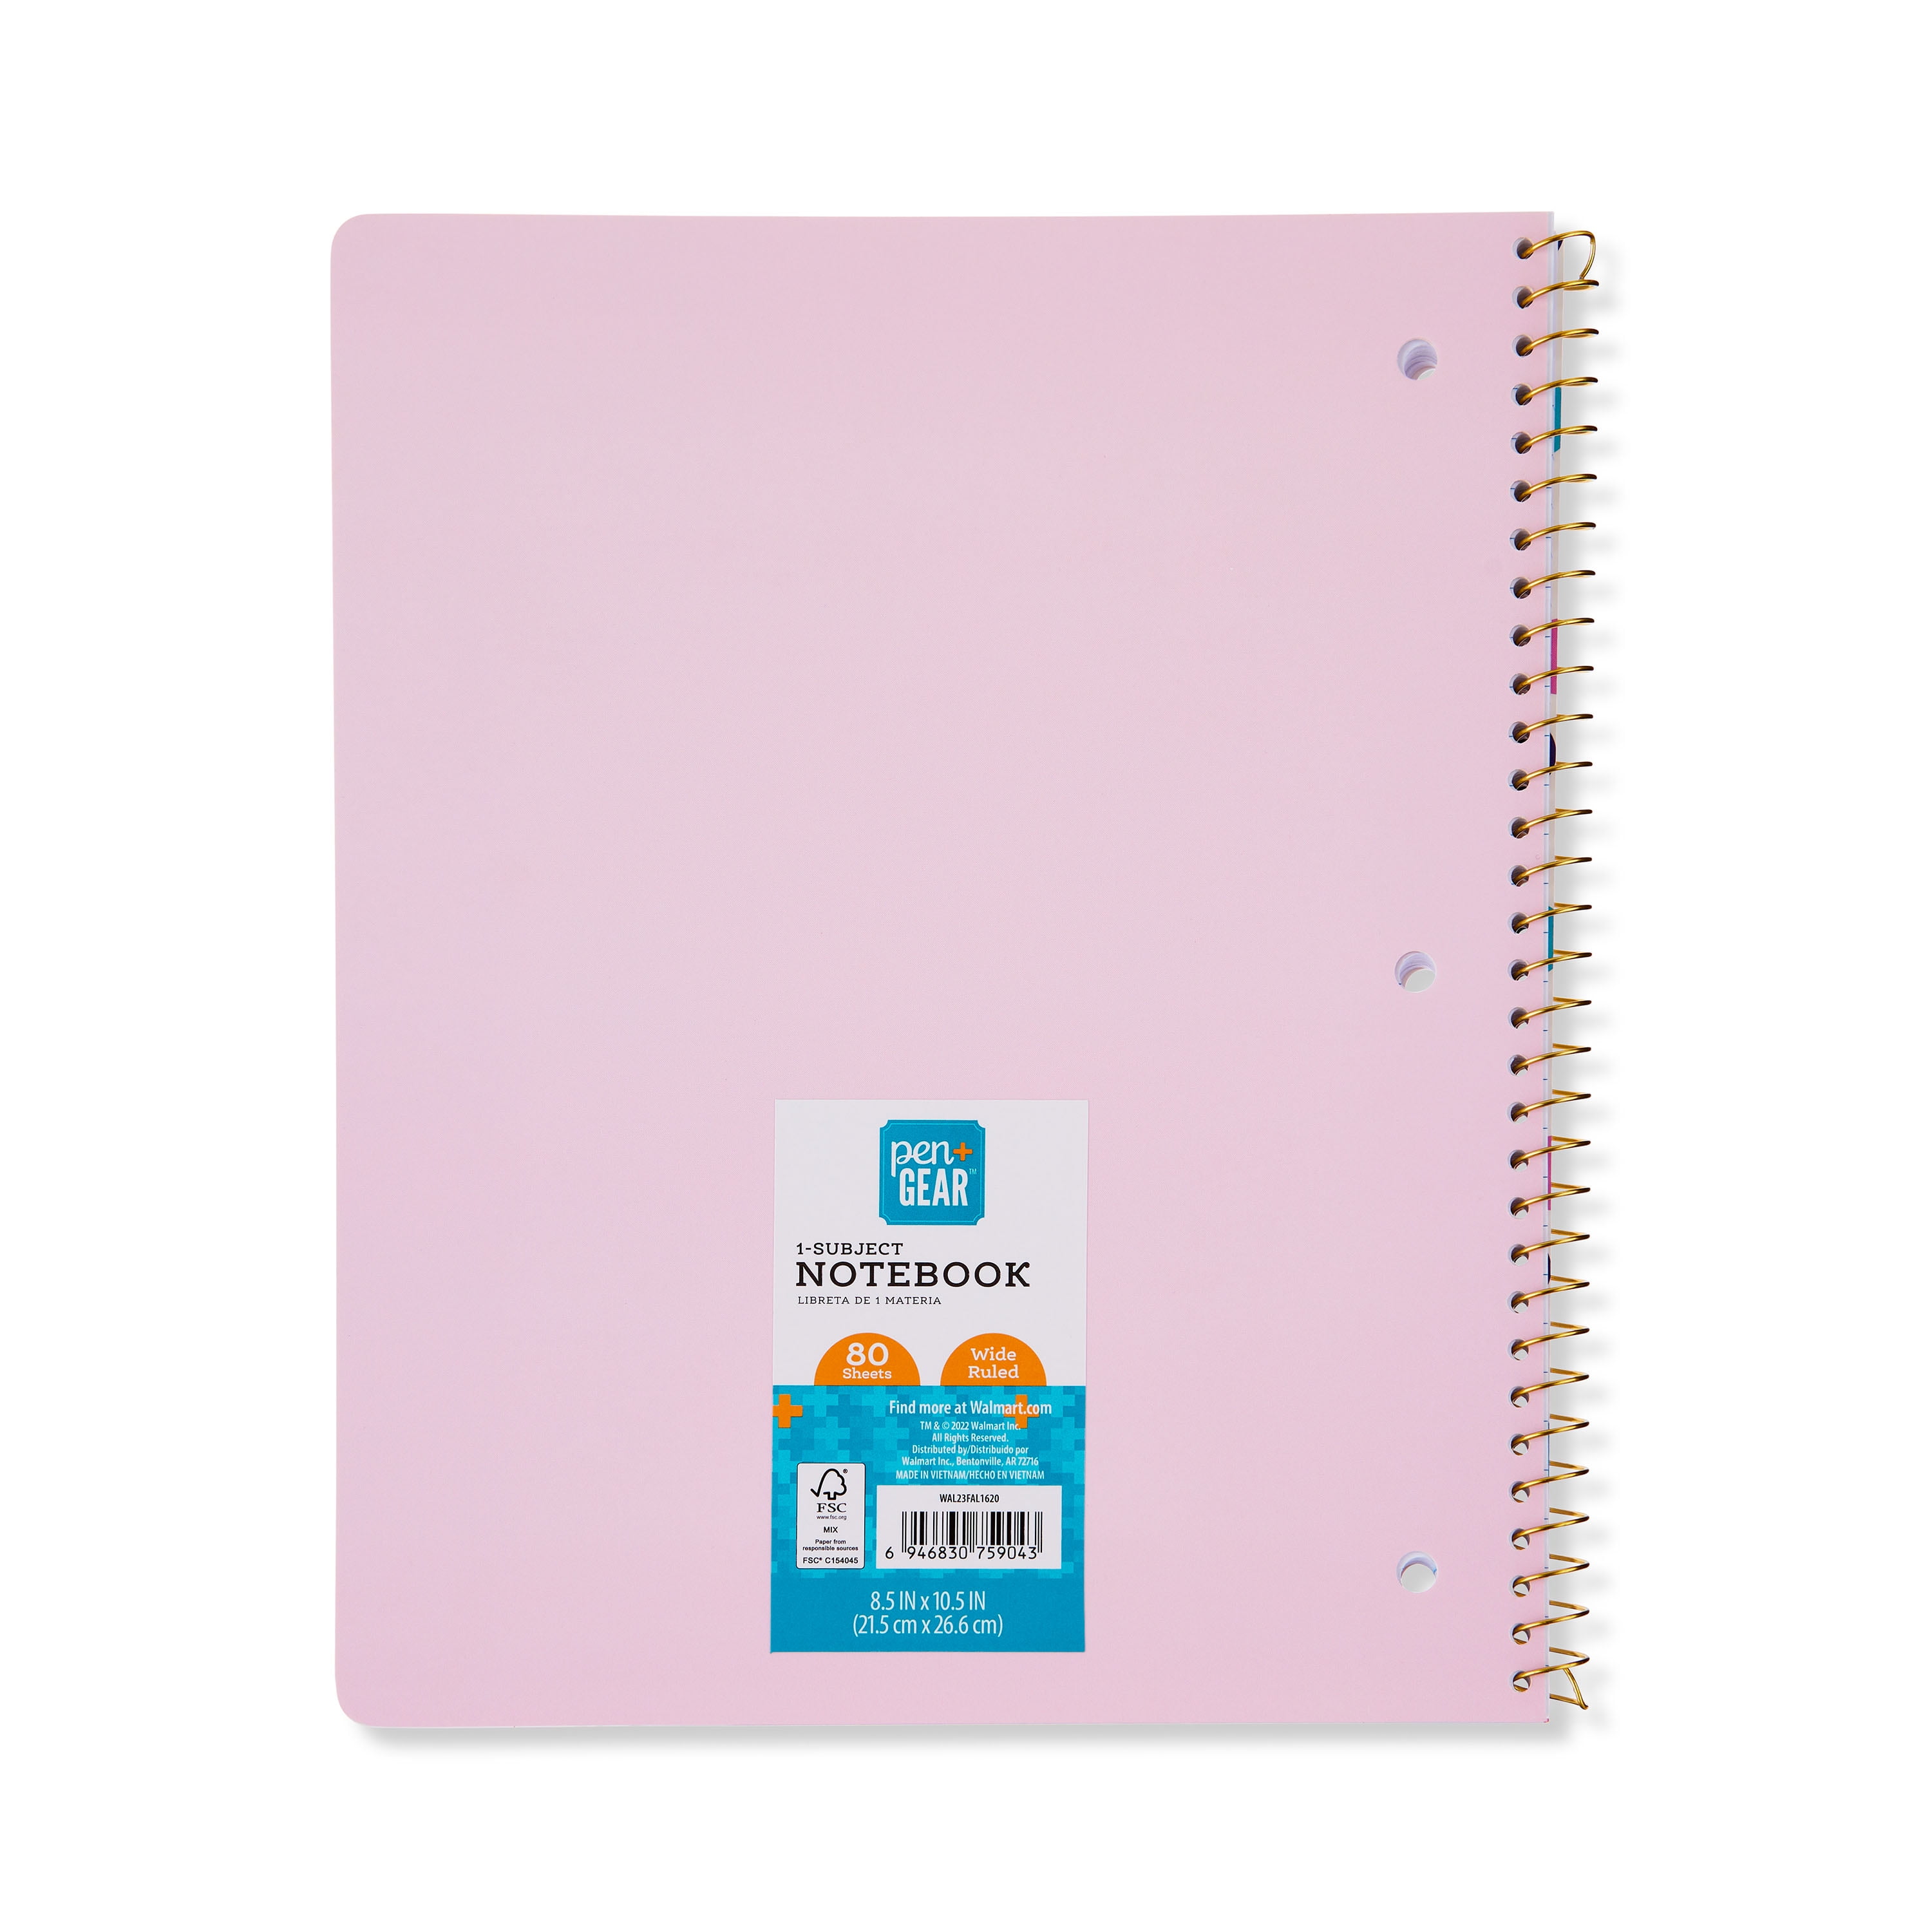 Lined Notebook Spiral Anime Cute Eyes College Ruled Notebook for Journaling,  5.12 *6.97*0.39 inches - Ralphs